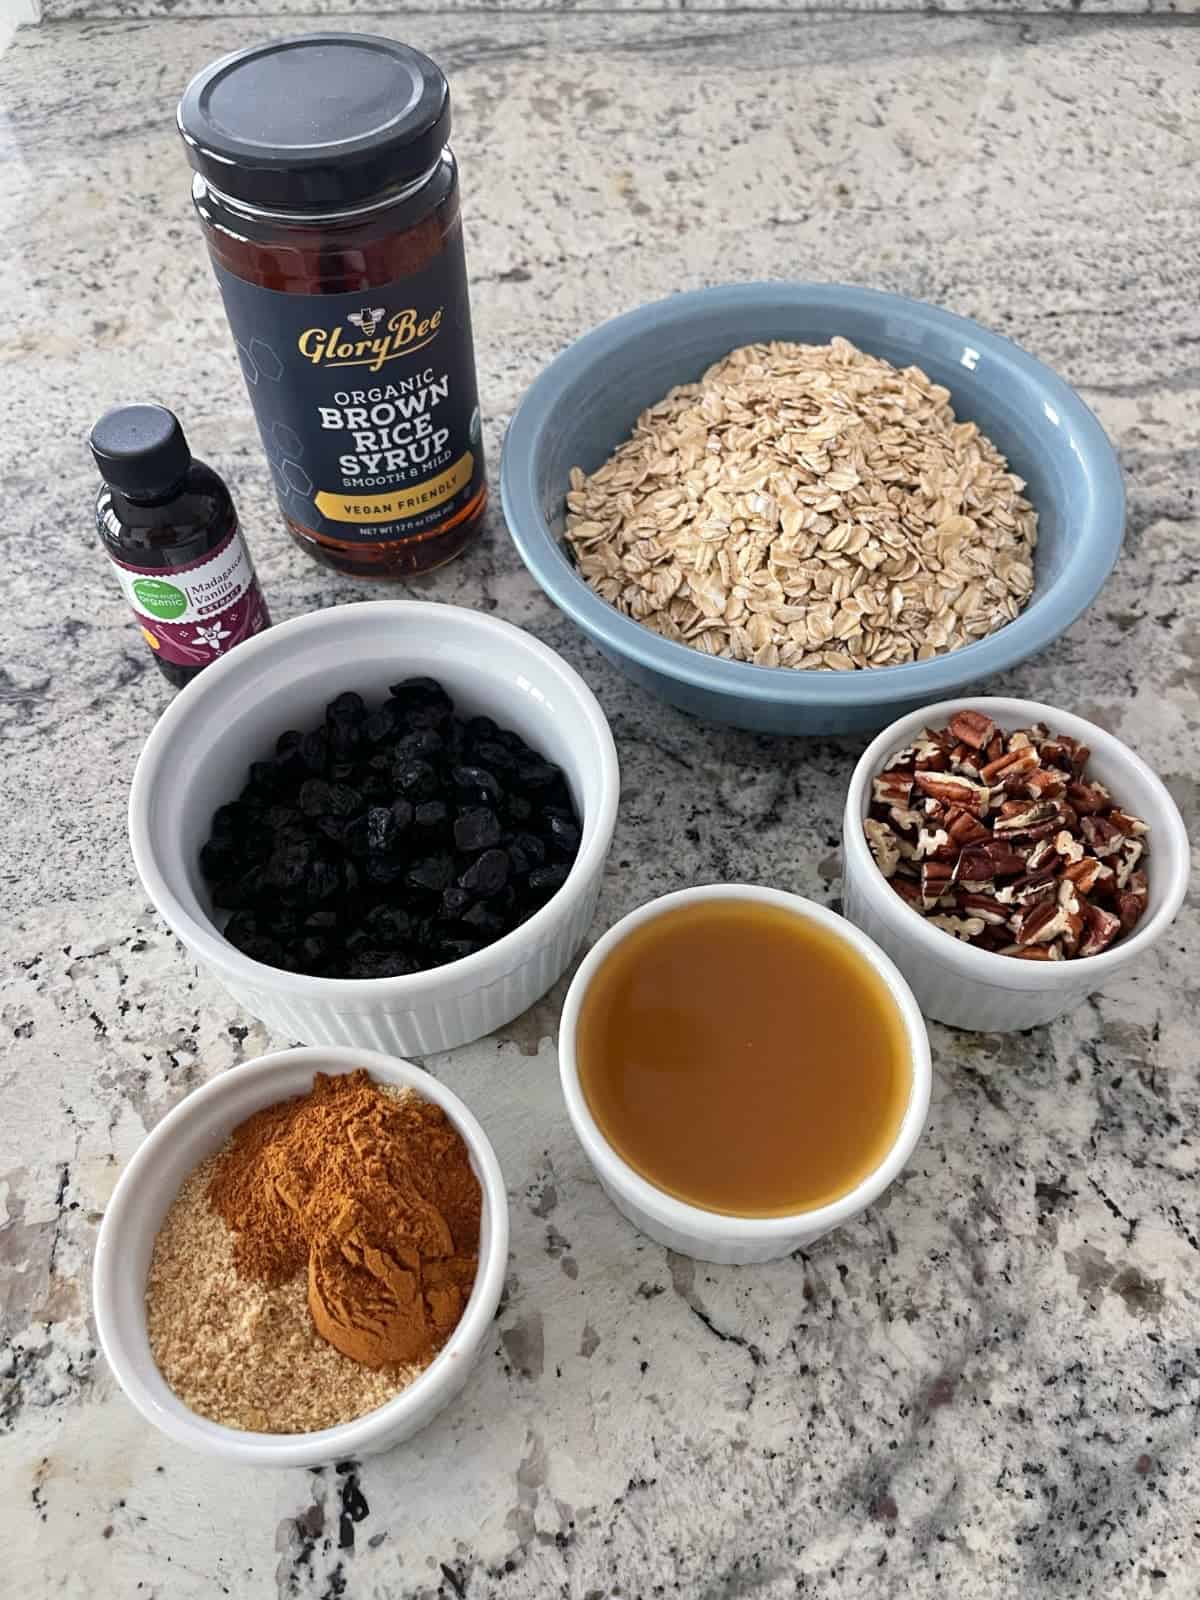 Ingredients including brown rice syrup, vanilla, rolled oats, dried blueberries, chopped pecans, unsweetened apple juice, flax meal and ground cinnamon.